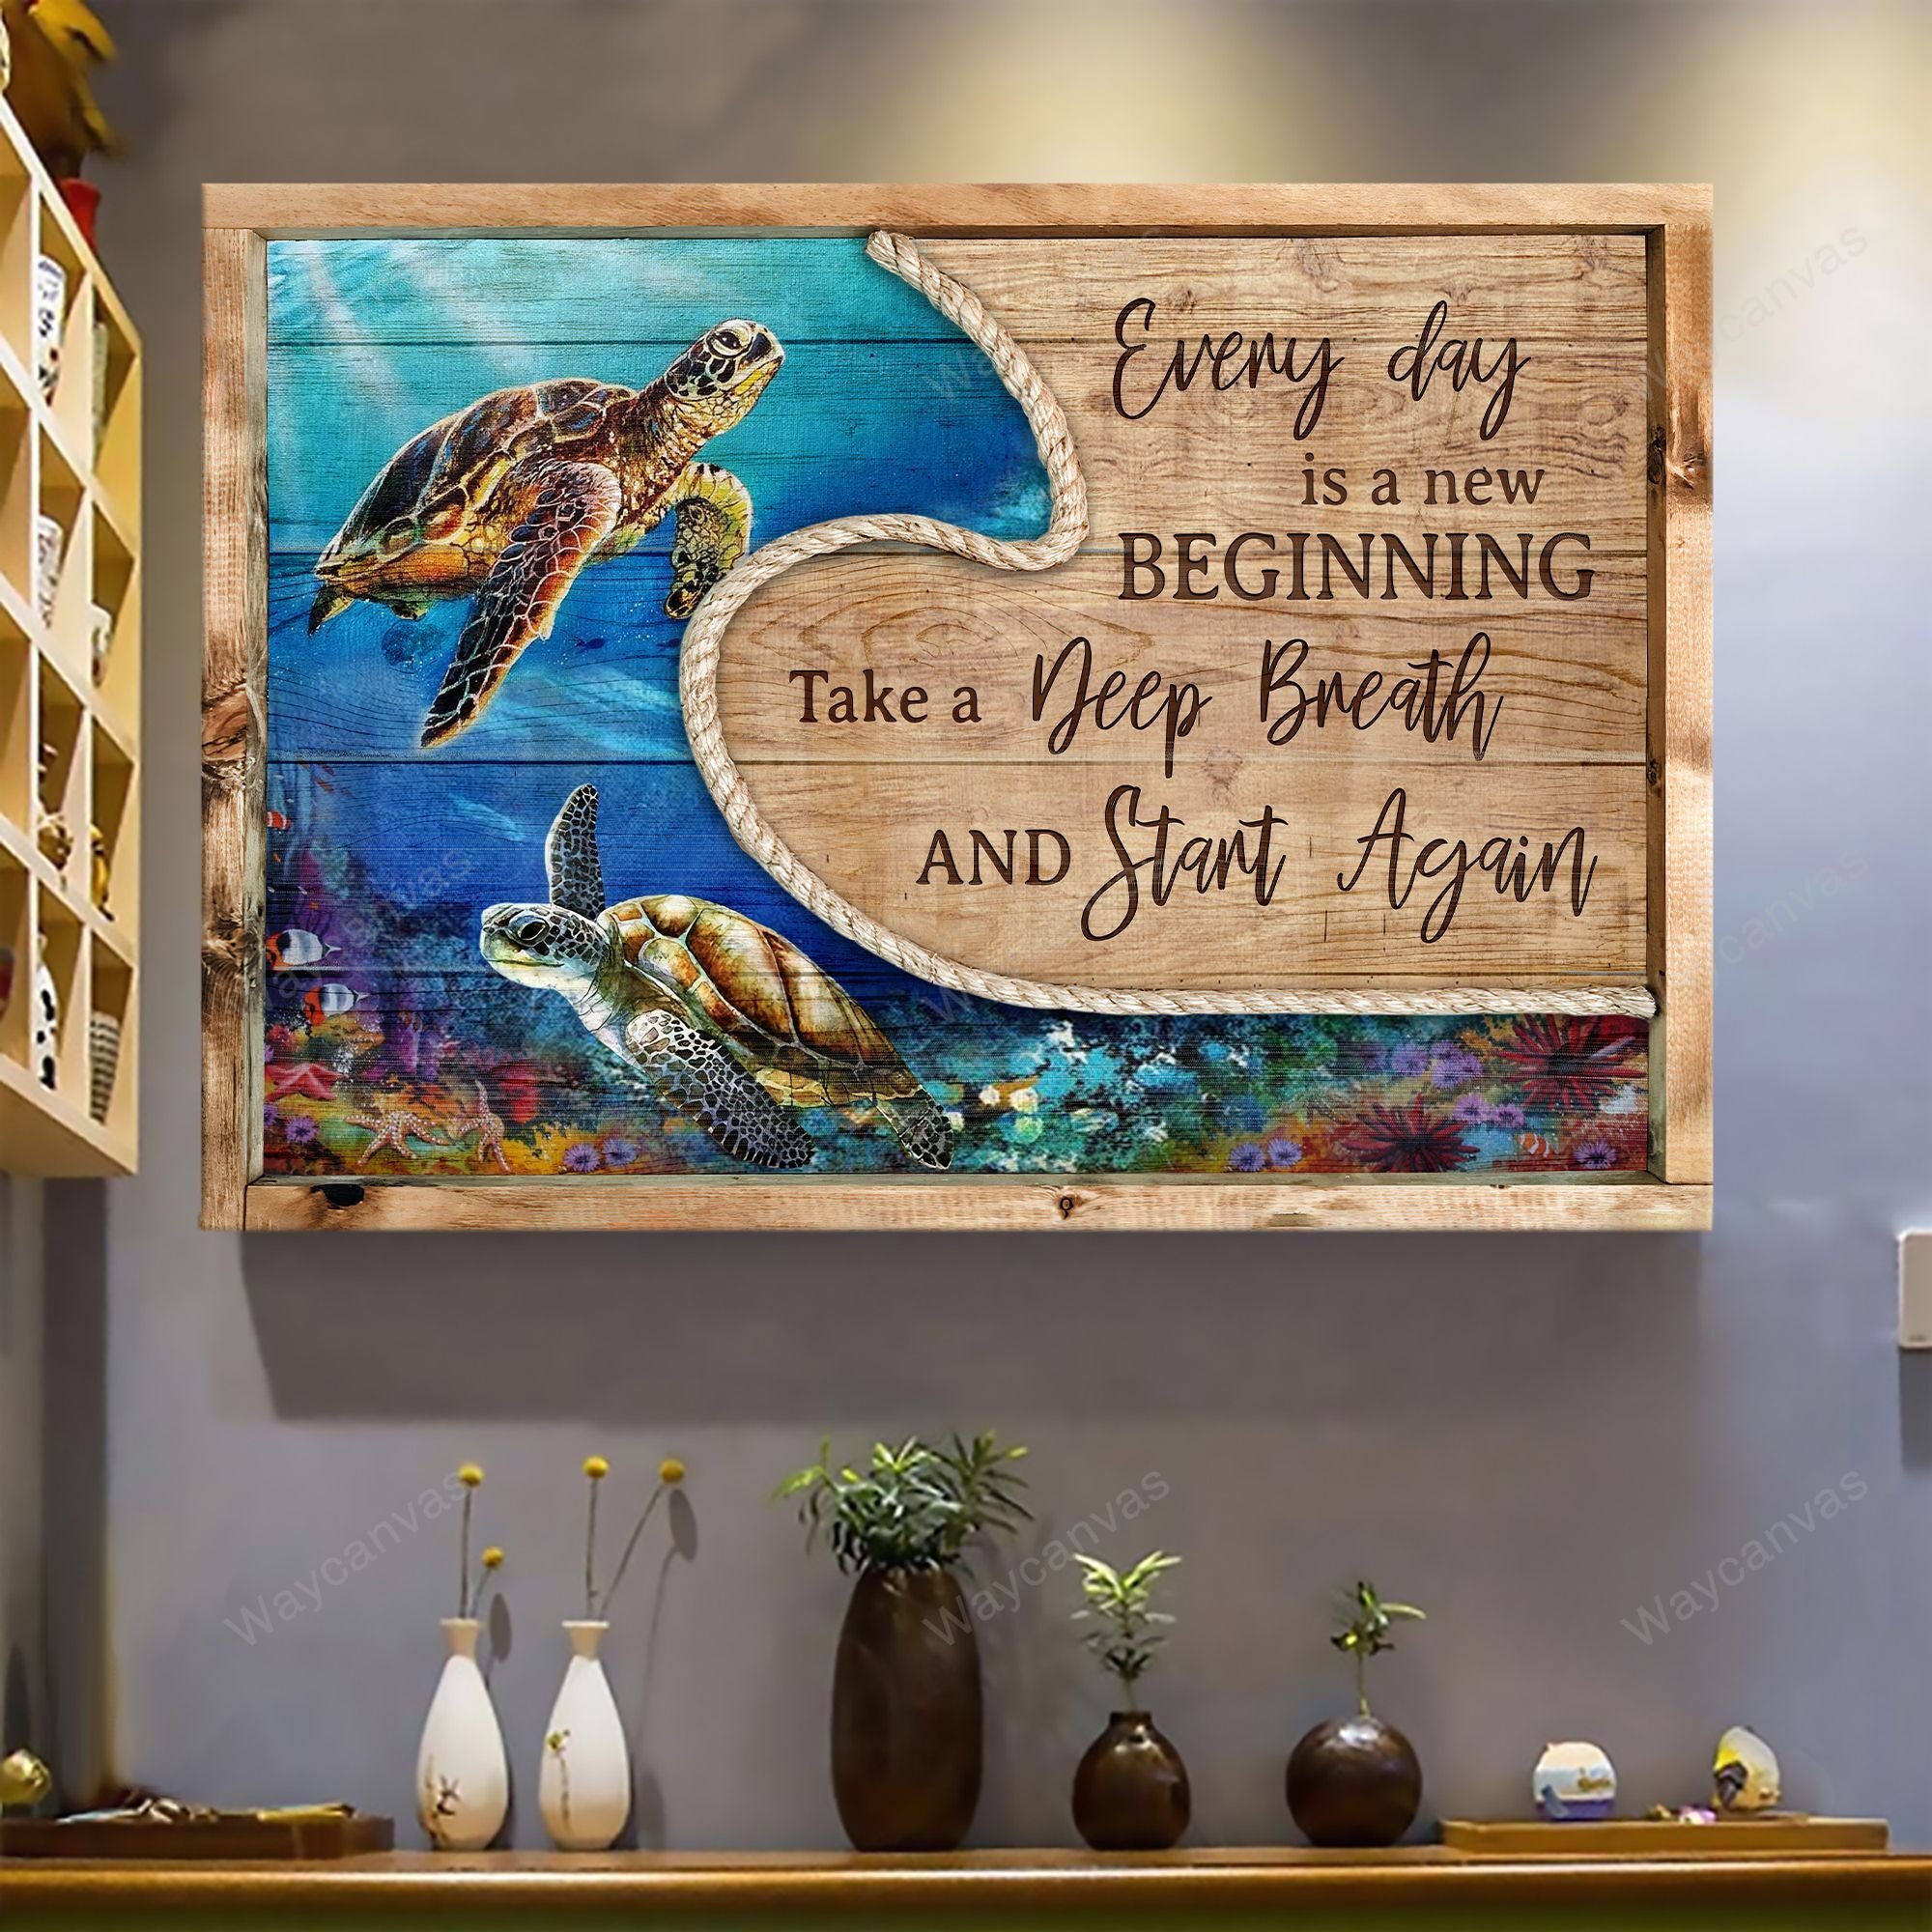 Blue ocean, Sea turtle, Every day is a new beginning - Jesus Landscape Canvas Prints, Wall Art